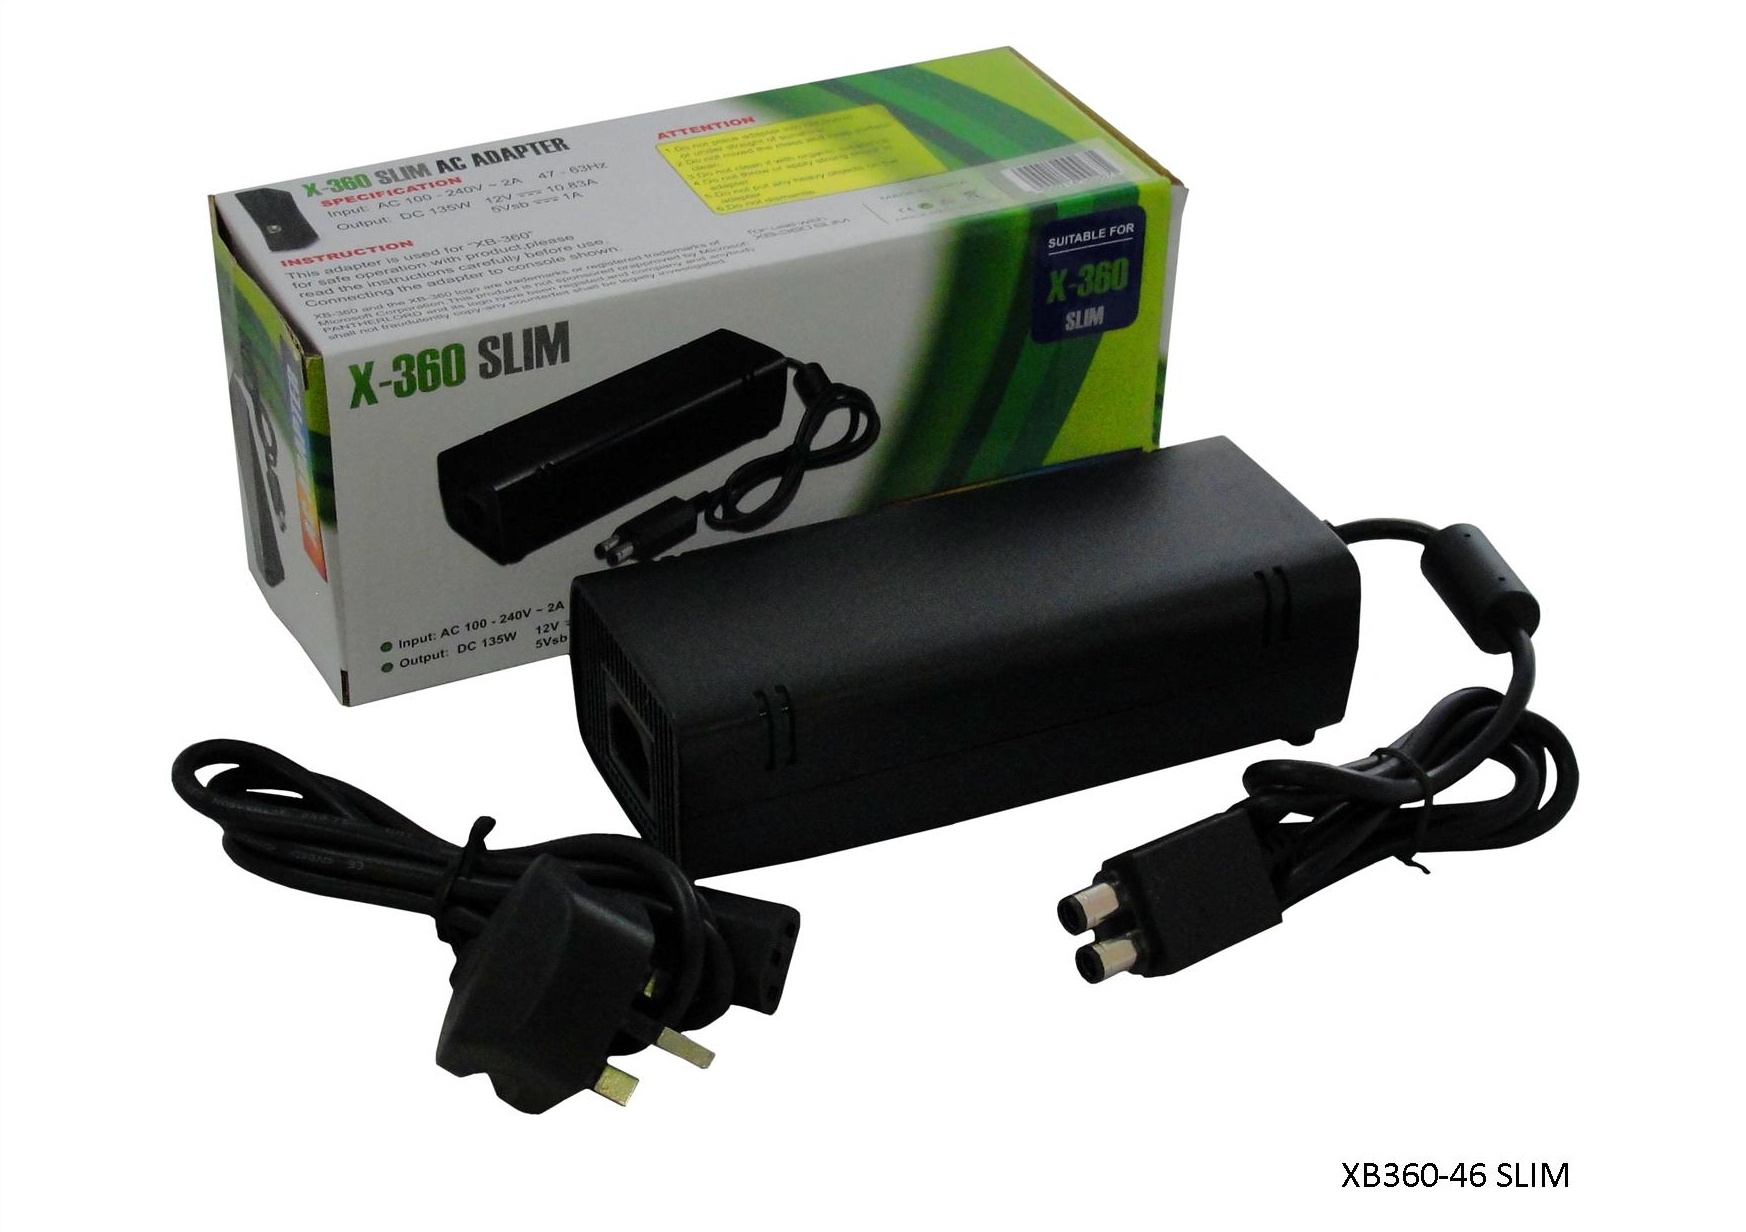 xbox 360 power supply for sale